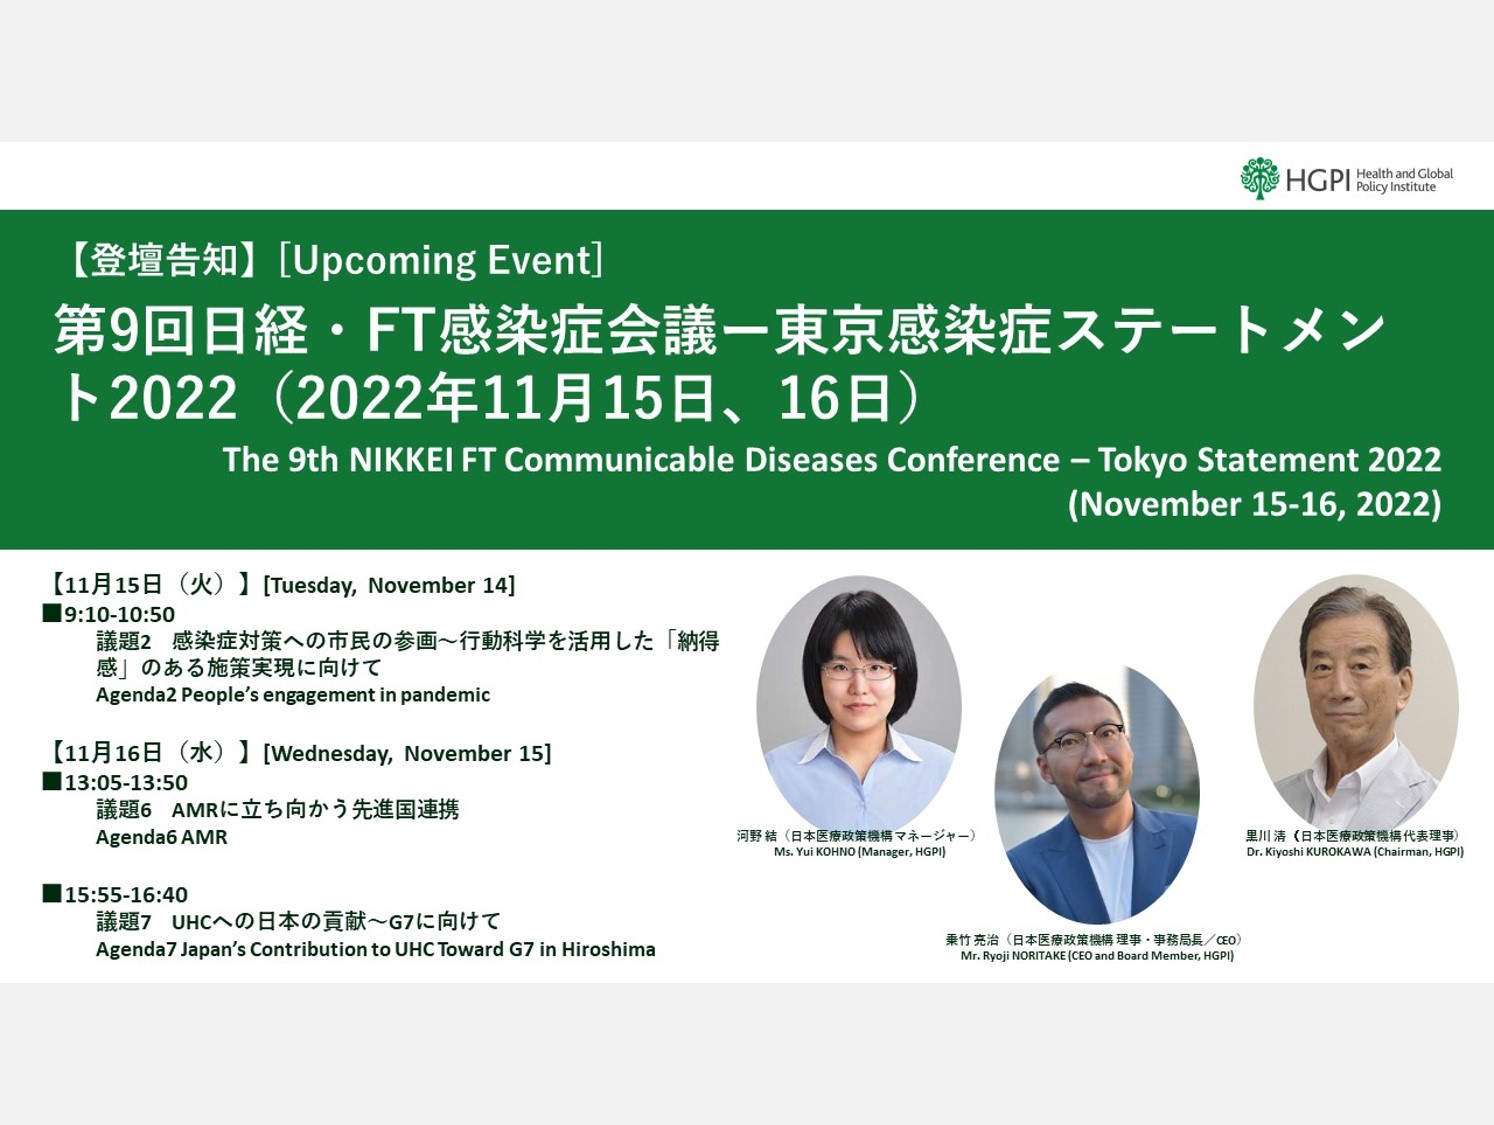 [Upcoming Event] The 9th NIKKEI FT Communicable Diseases Conference – Tokyo Statement 2022 (November 15-16, 2022)